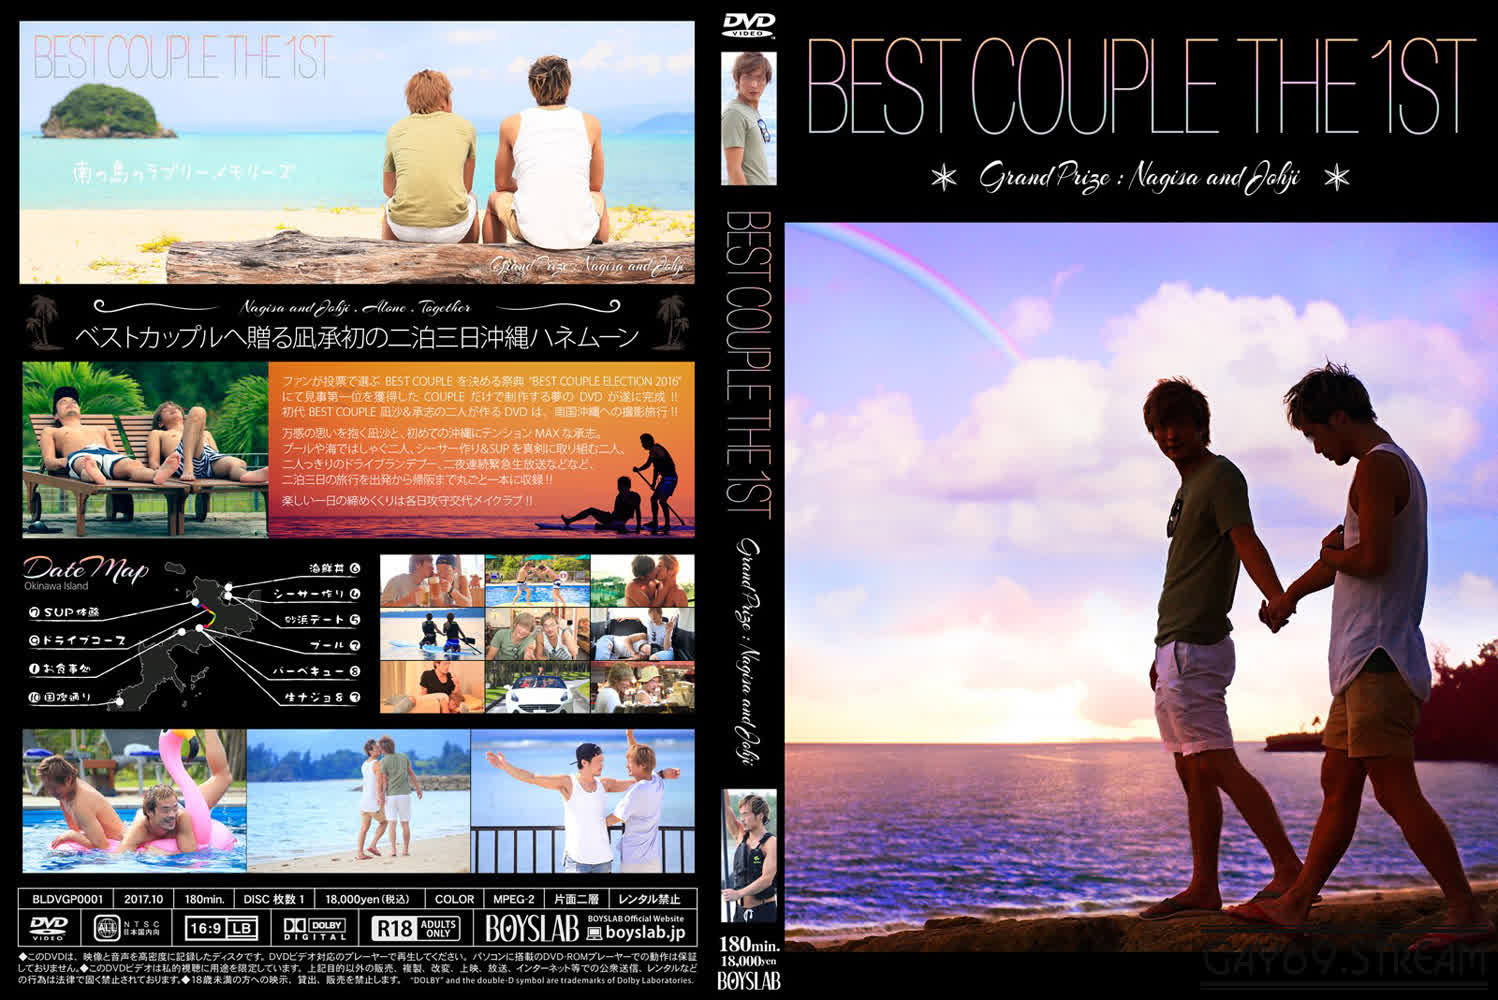 BOYSLAB – Best Couple The 1st – Grand Prize